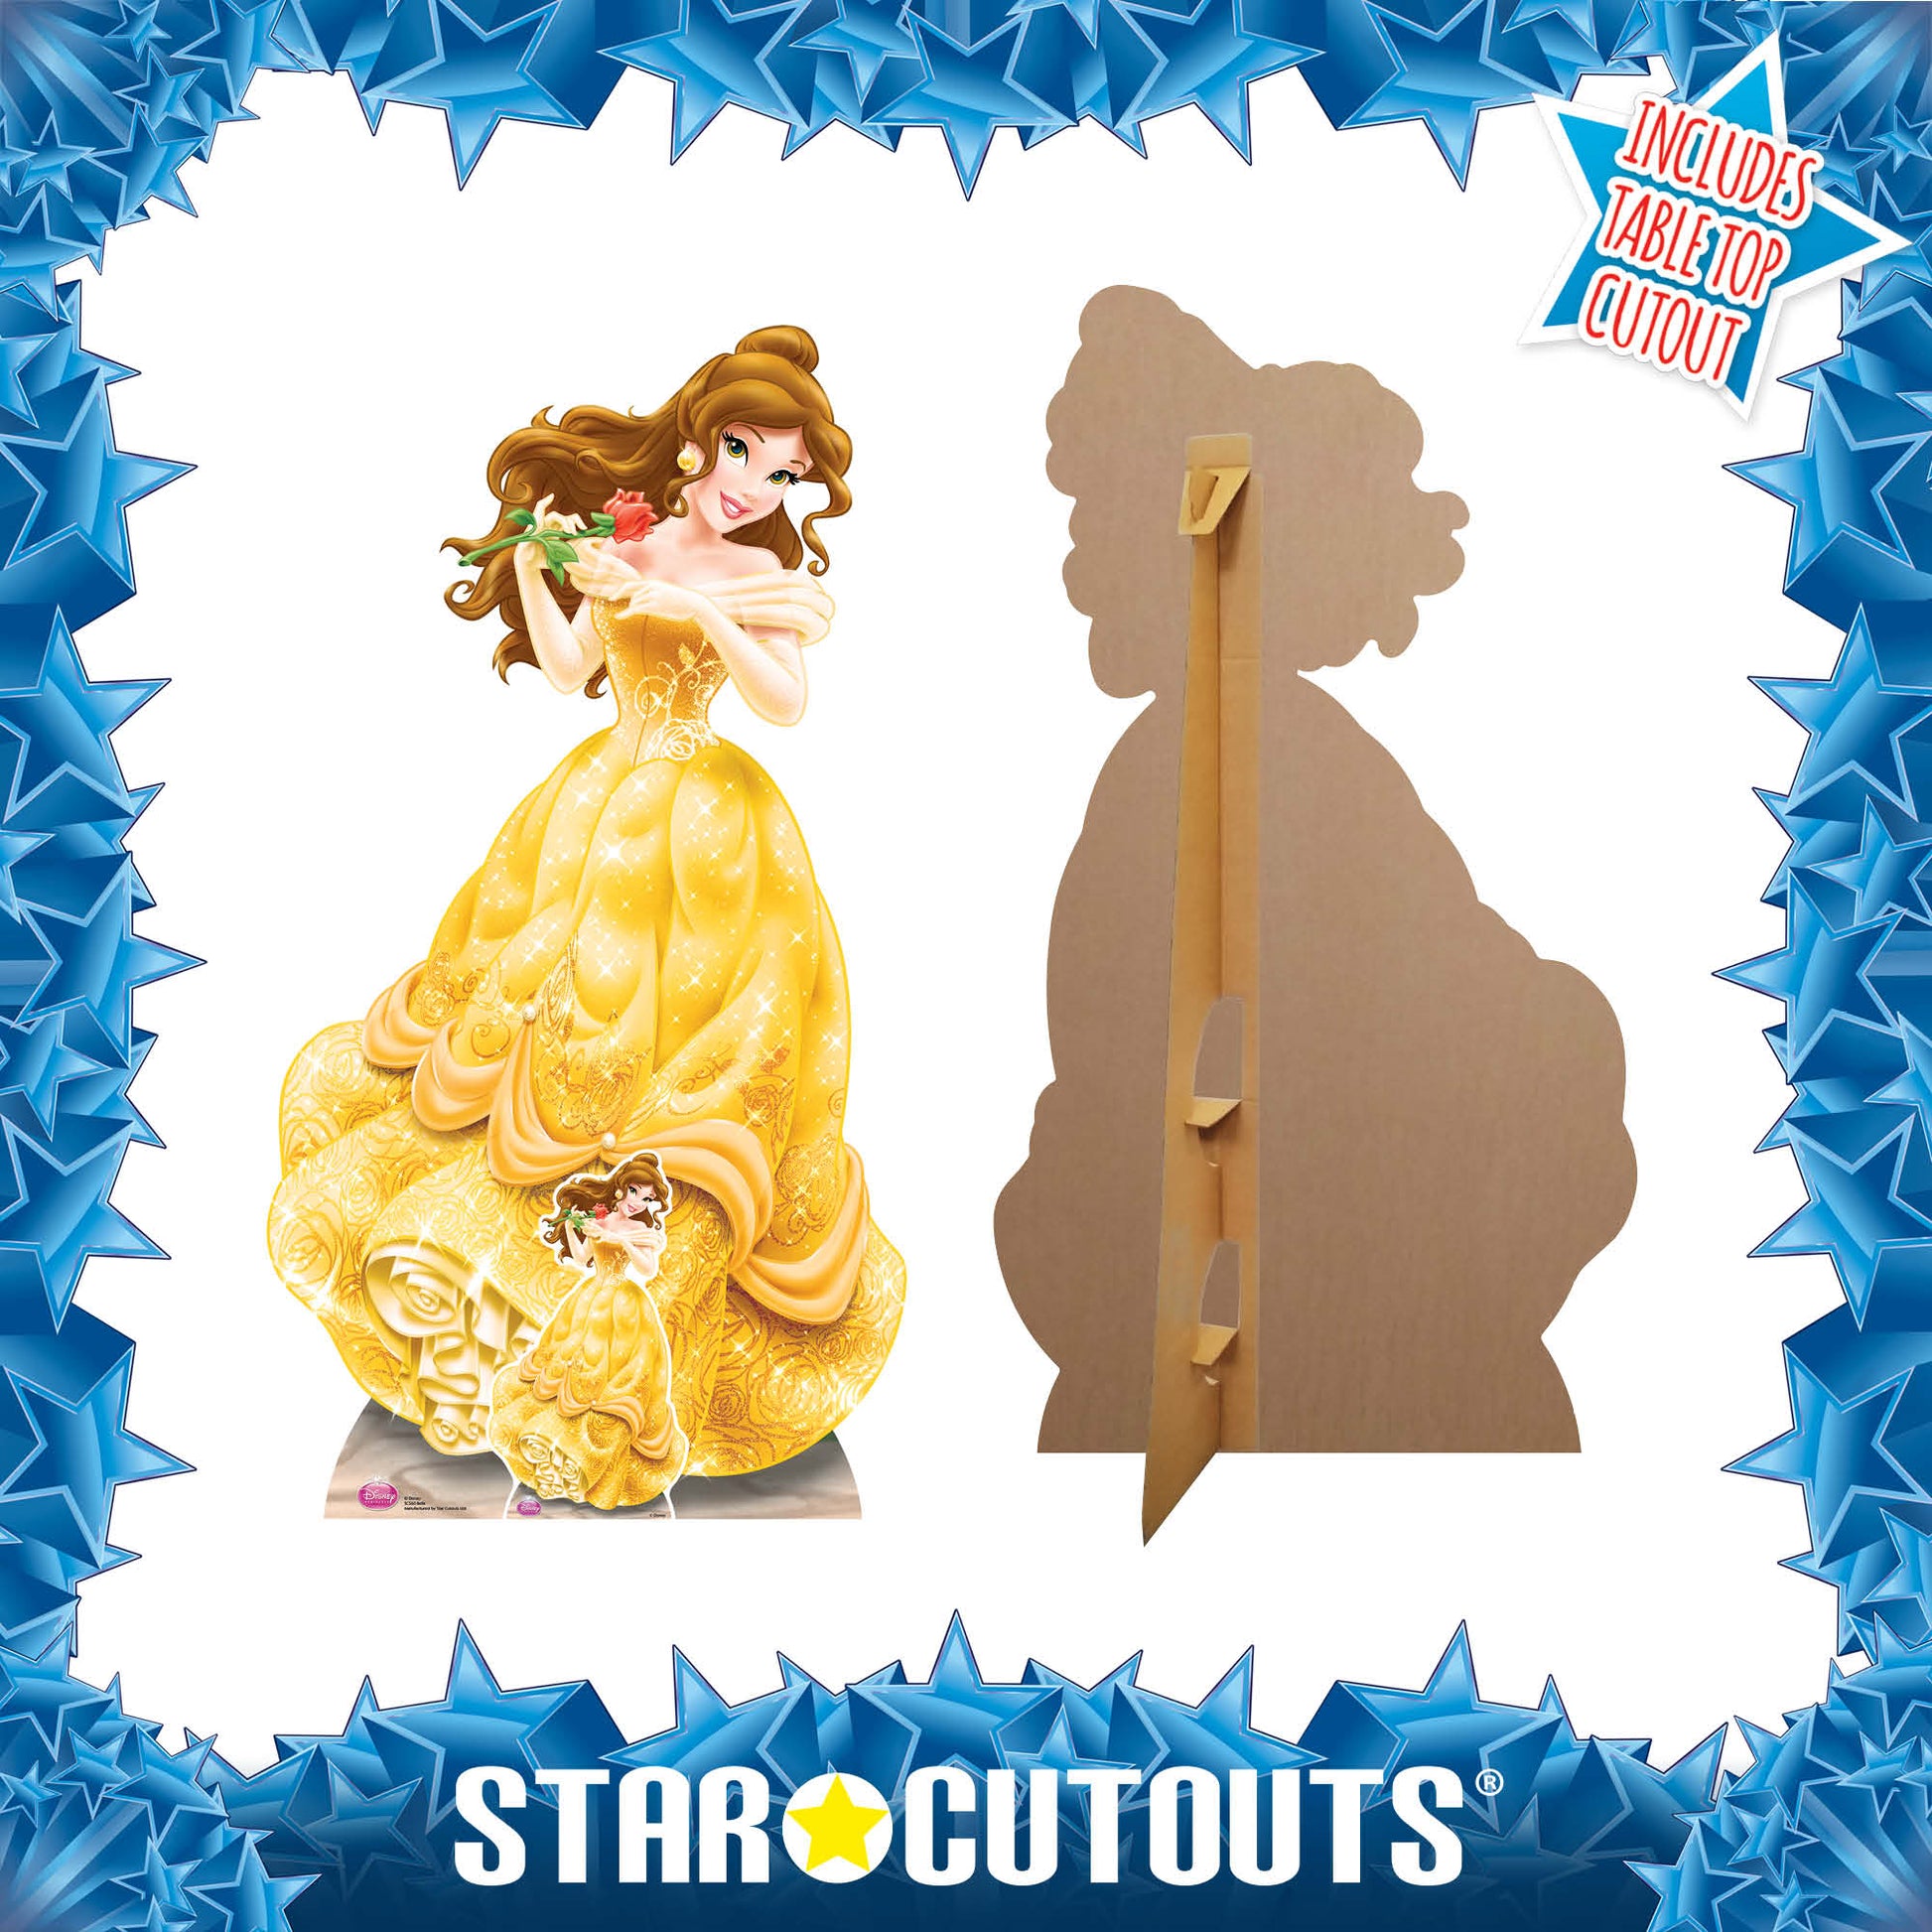 Belle Beauty and The Beast Cardboard Cutout